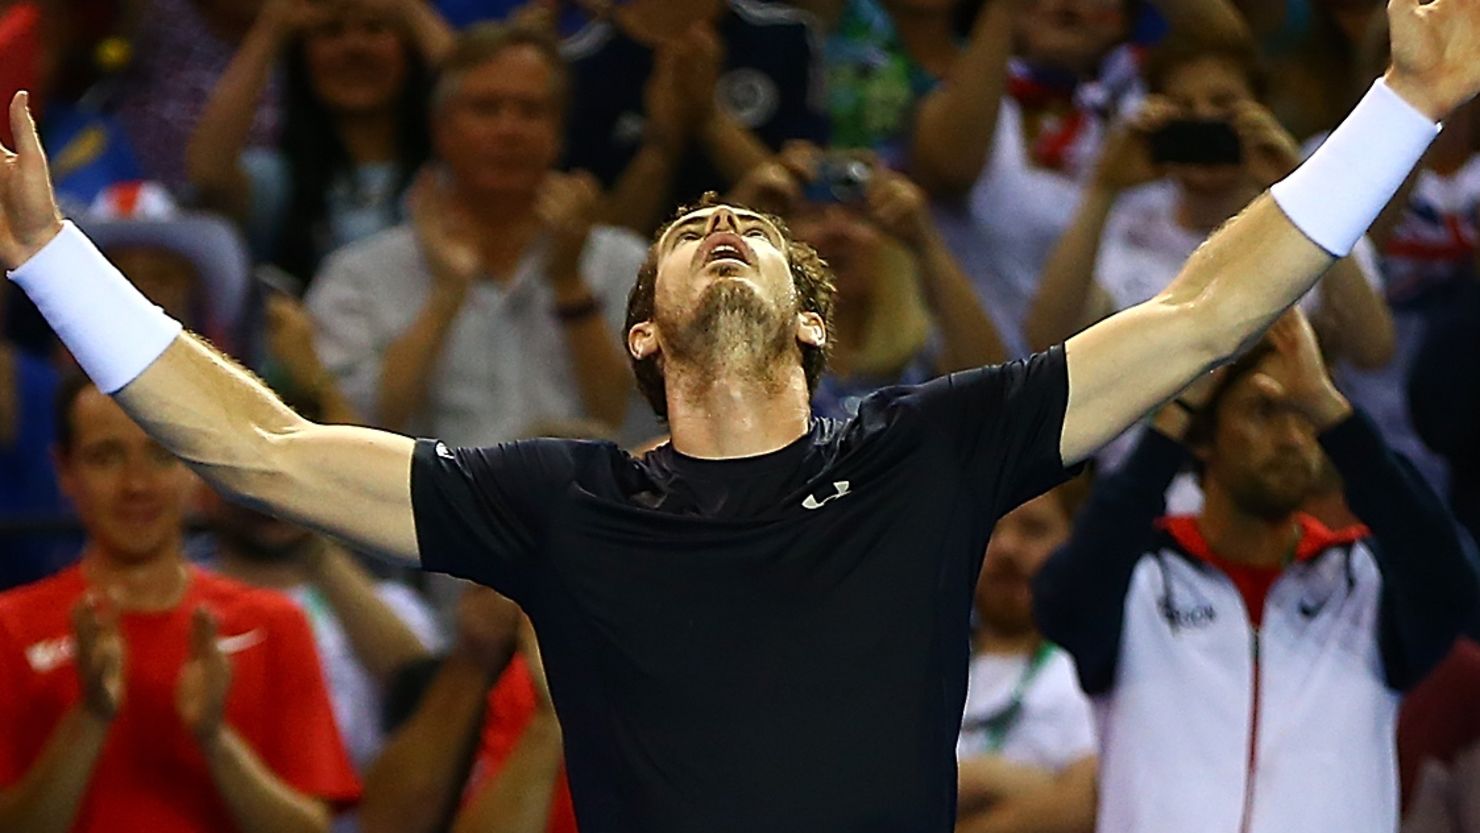  Andy Murray savors his clinching victory for Great Britain in the Davis Cup semifinal against Australia in Glasgow.